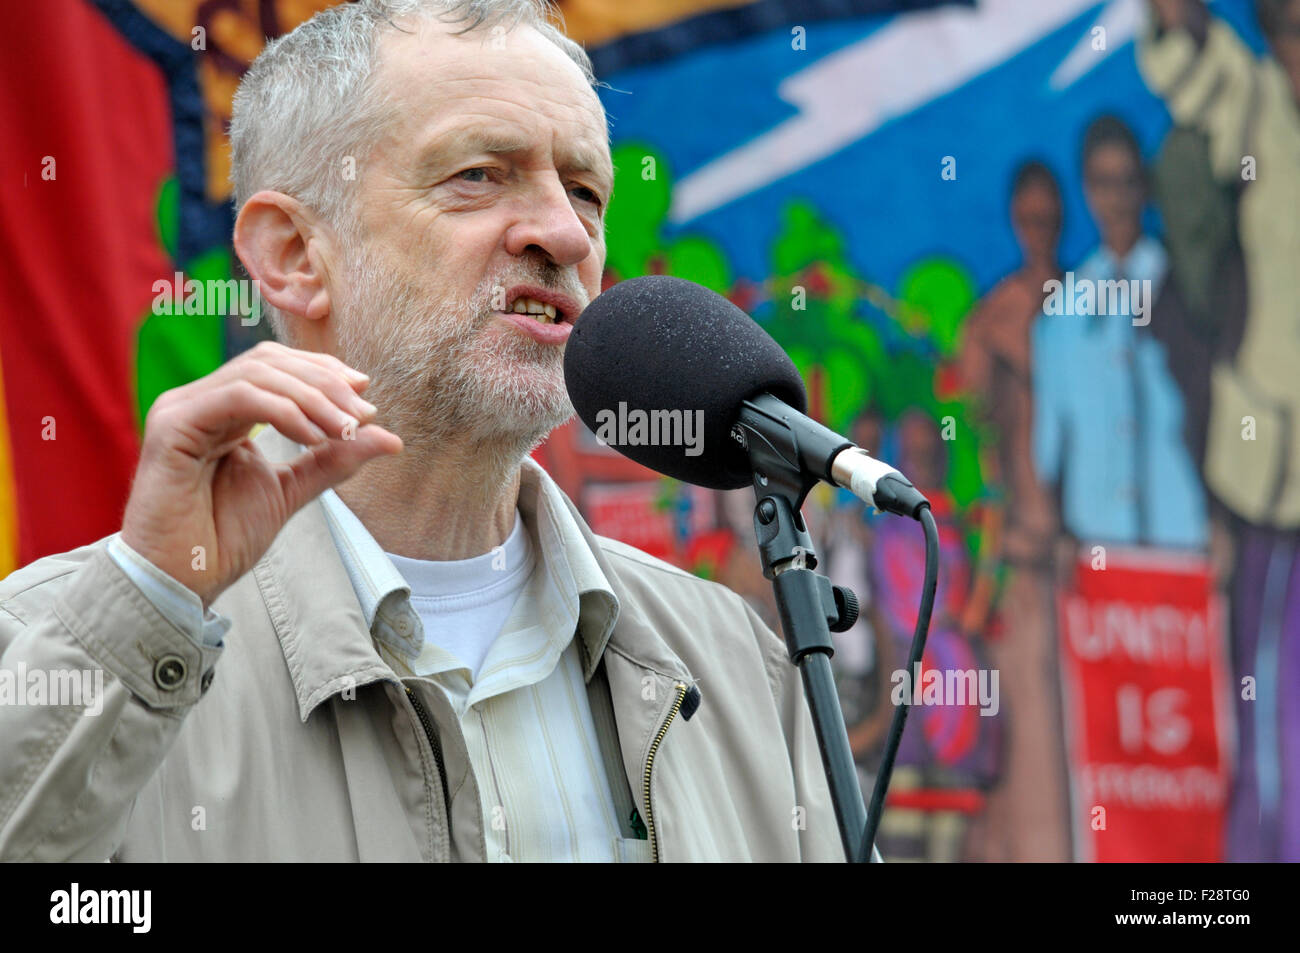 Jeremy Corbyn MP (Labour member for Islington North, now Labour Leader) at the May Day rally in Trafalgar Square, London, 2014 Stock Photo